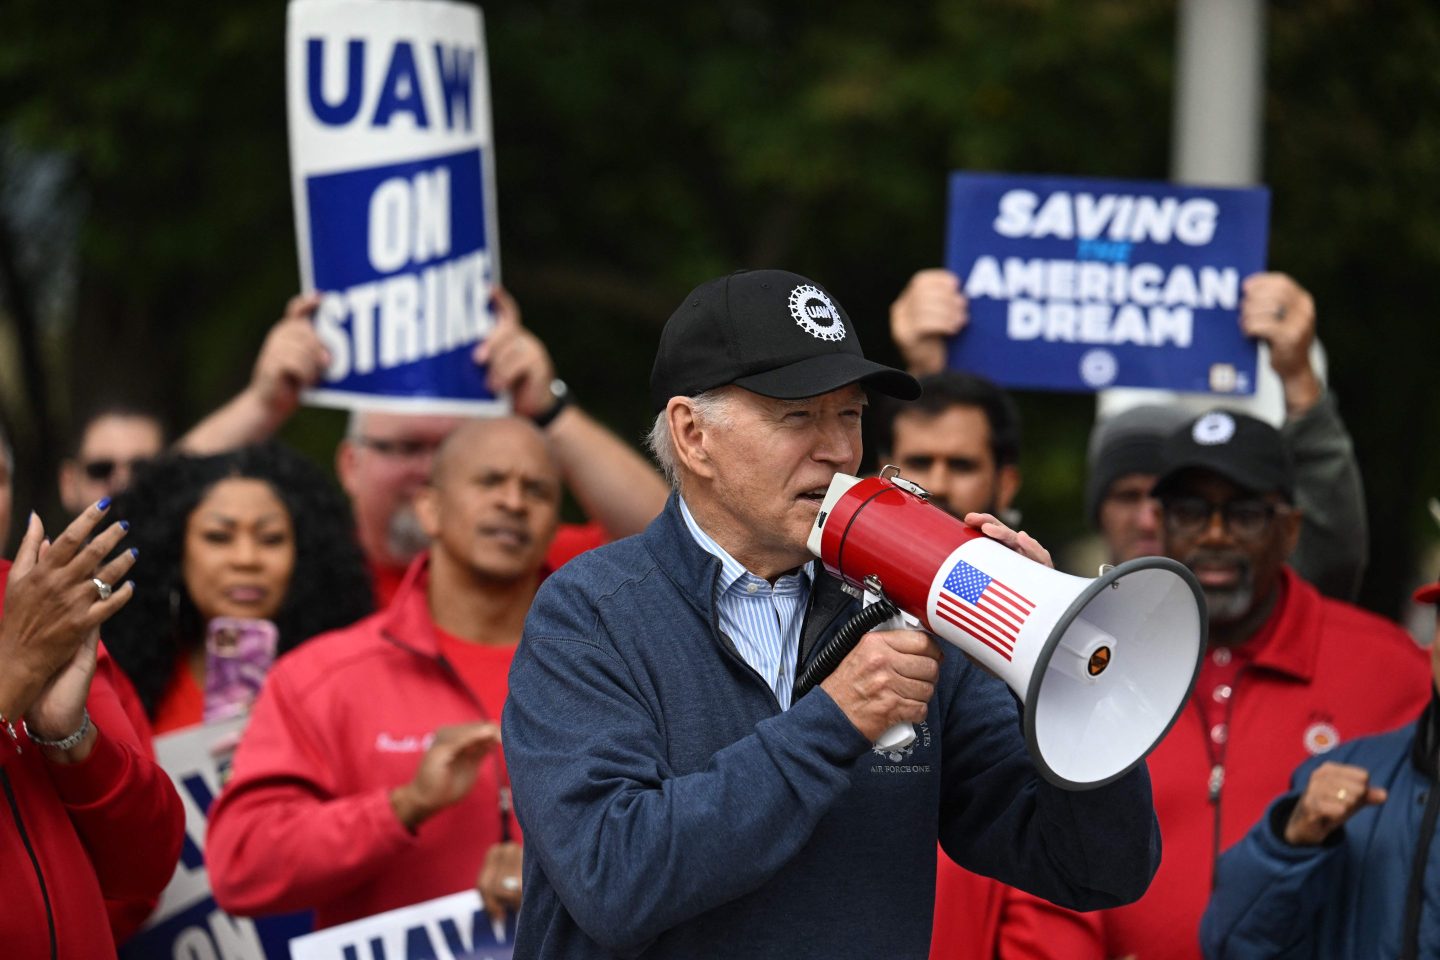 TOPSHOT &#8211; US President Joe Biden addresses striking members of the United Auto Workers (UAW) union at a picket line outside a General Motors Service Parts Operations plant in Belleville, Michigan, on September 26, 2023. Some 5,600 members of the UAW walked out of 38 US parts and distribution centers at General Motors and Stellantis at noon September 22, 2023, adding to last week&#8217;s dramatic worker walkout. According to the White House, Biden is the first sitting president to join a picket line. (Photo by Jim WATSON / AFP) (Photo by JIM WATSON/AFP via Getty Images)